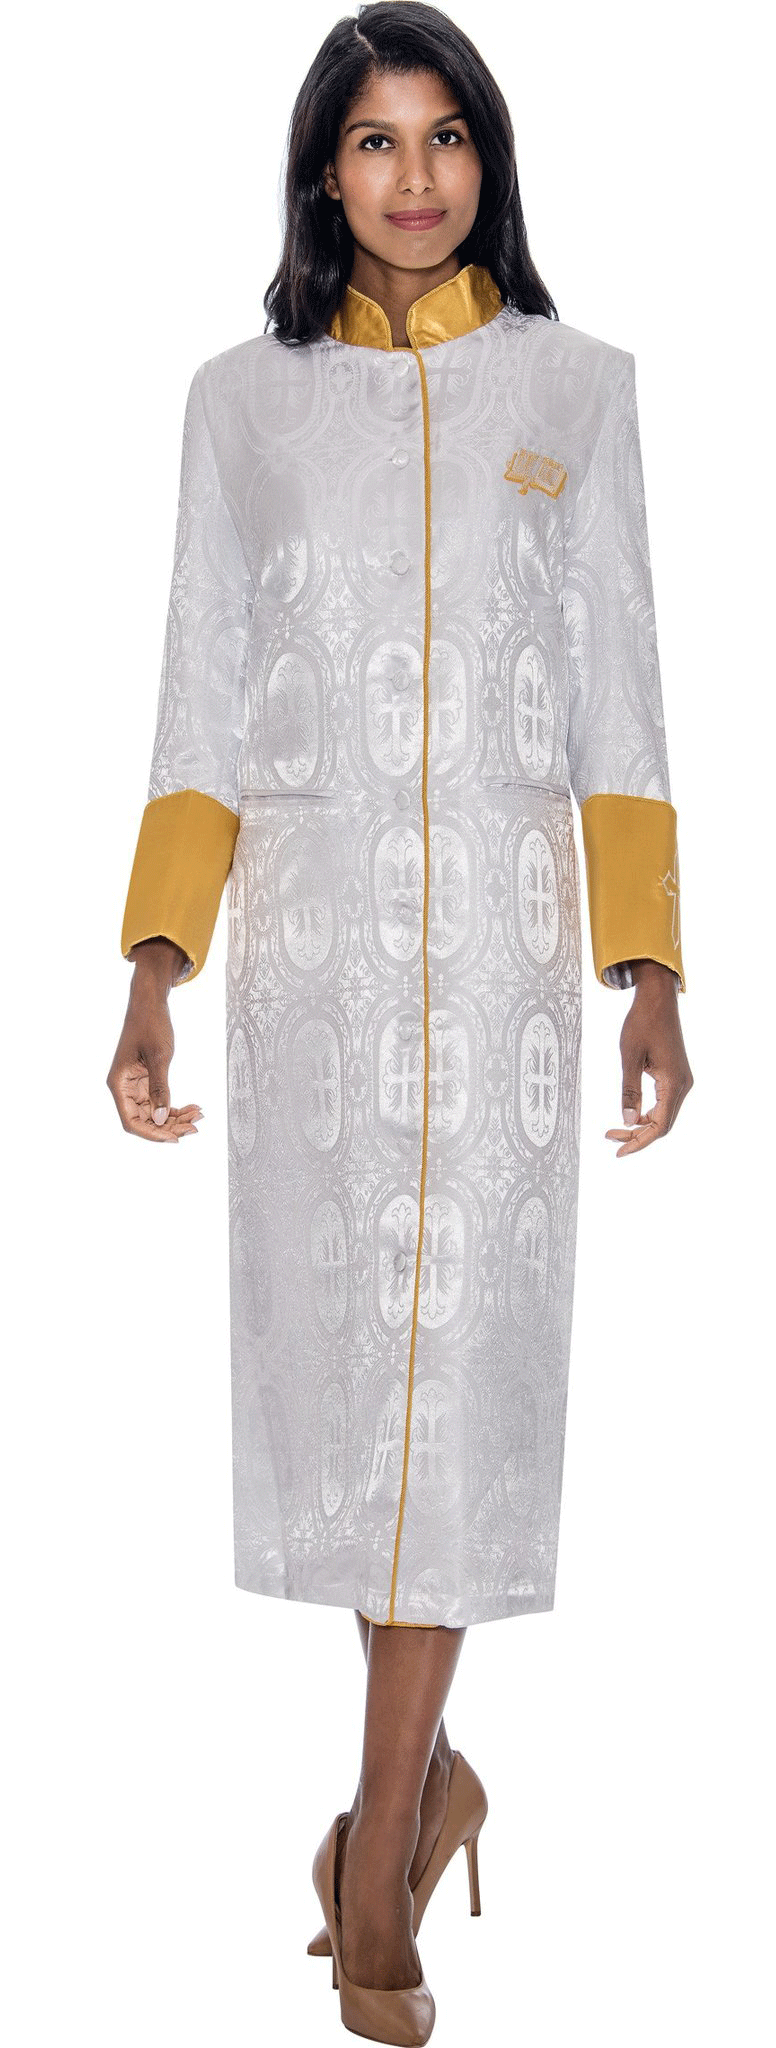 Women Cassock Robe RR9501-White/Gold - Church Suits For Less